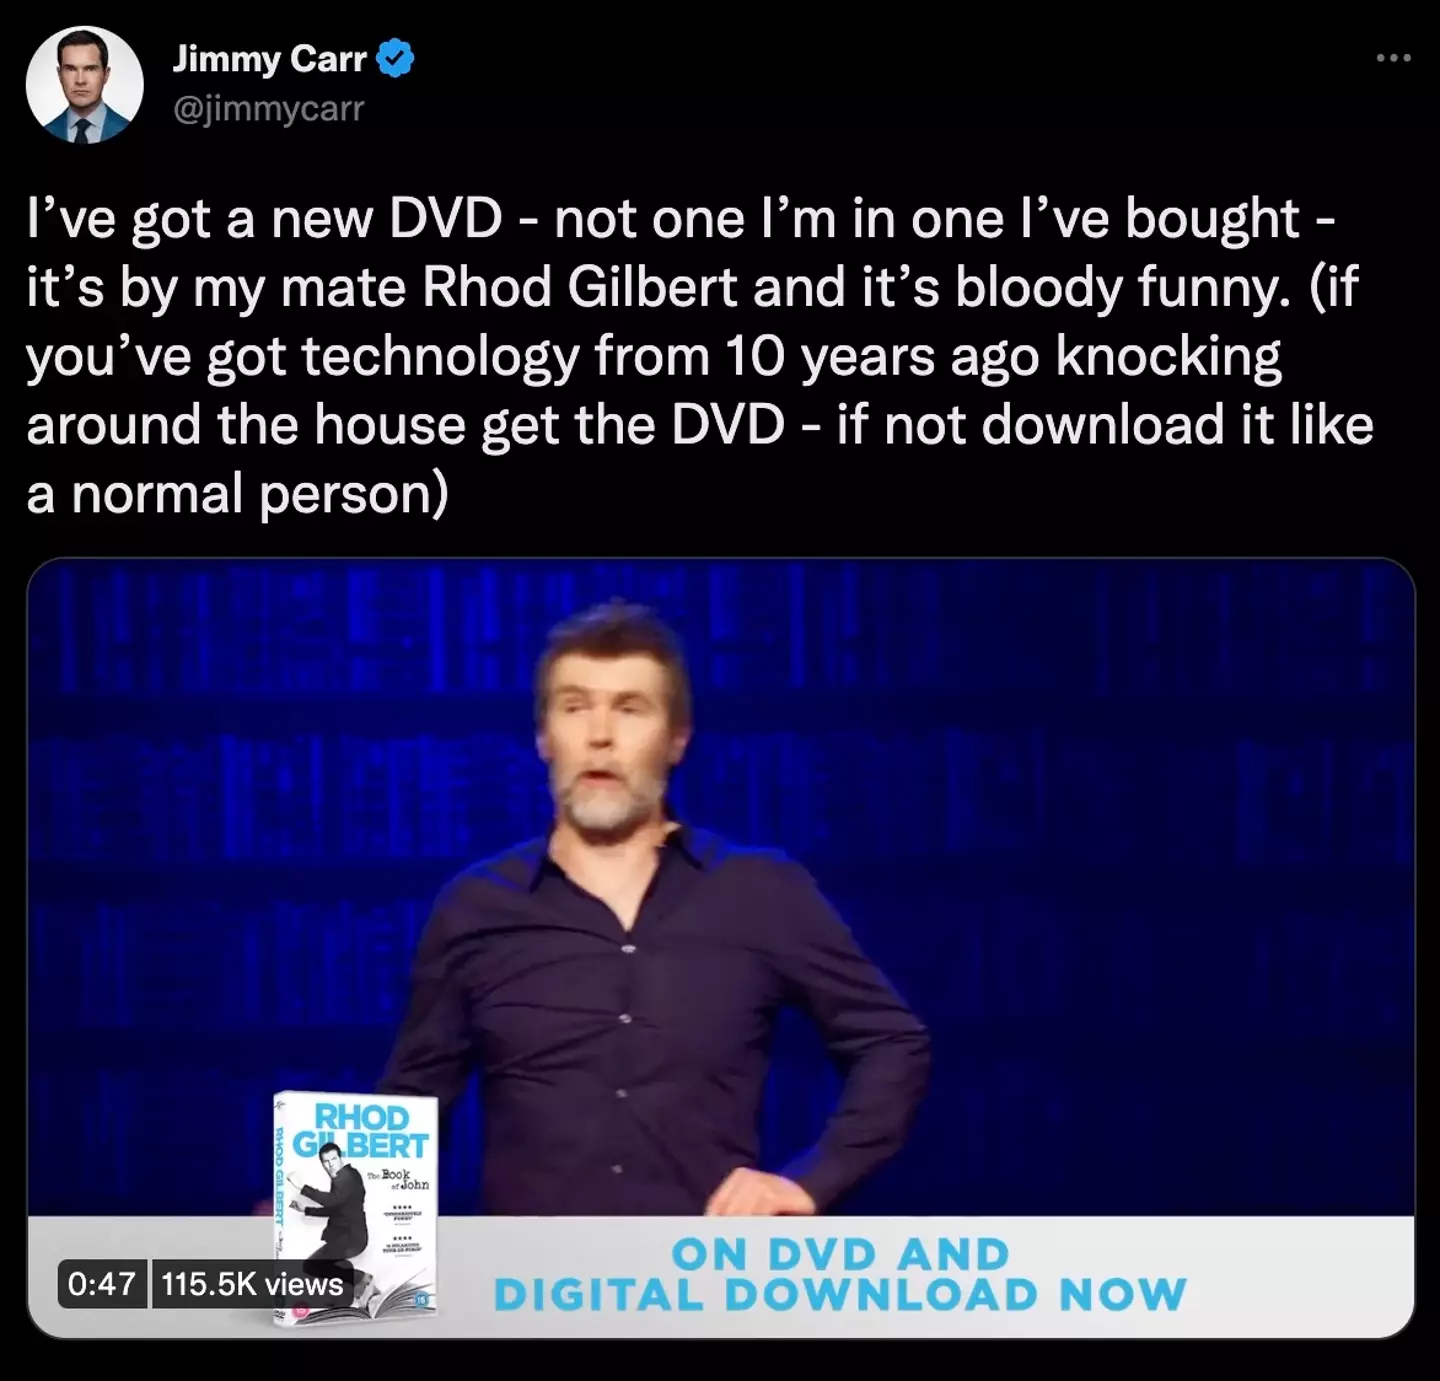 Jimmy Carr has offered his support to Rhod Gilbert.